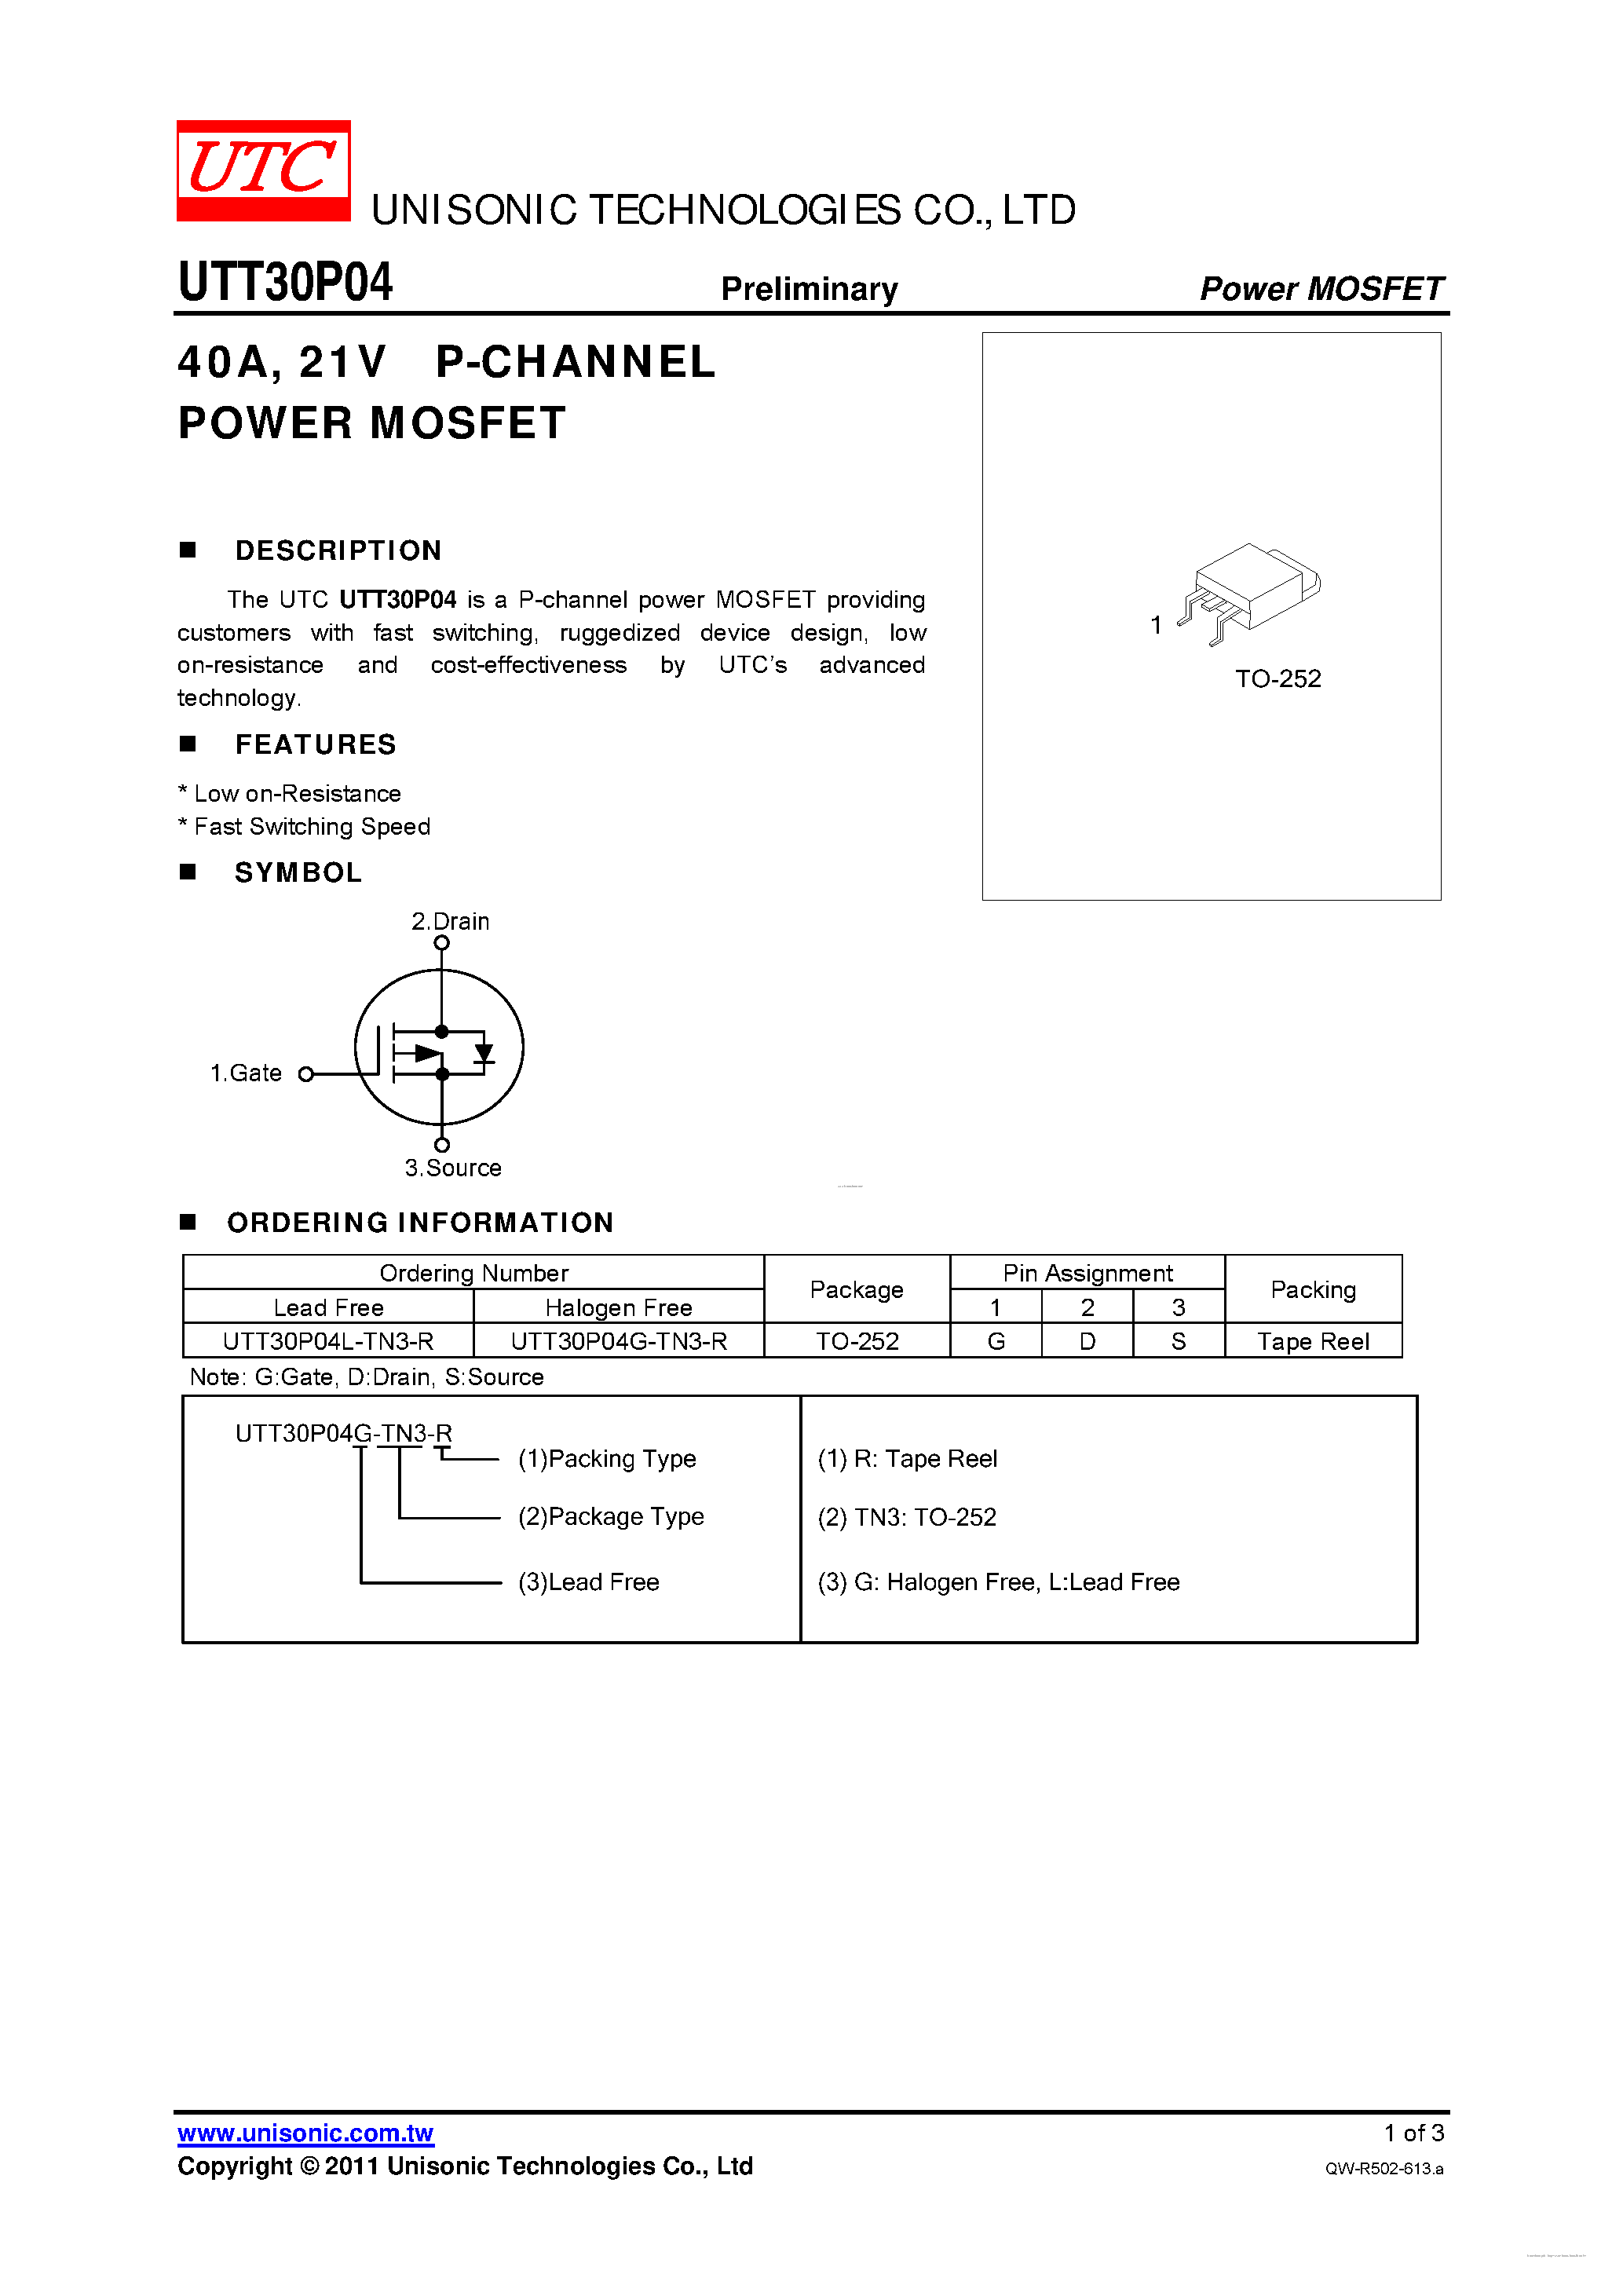 Datasheet UTT30P04 - P-CHANNEL POWER MOSFET page 1